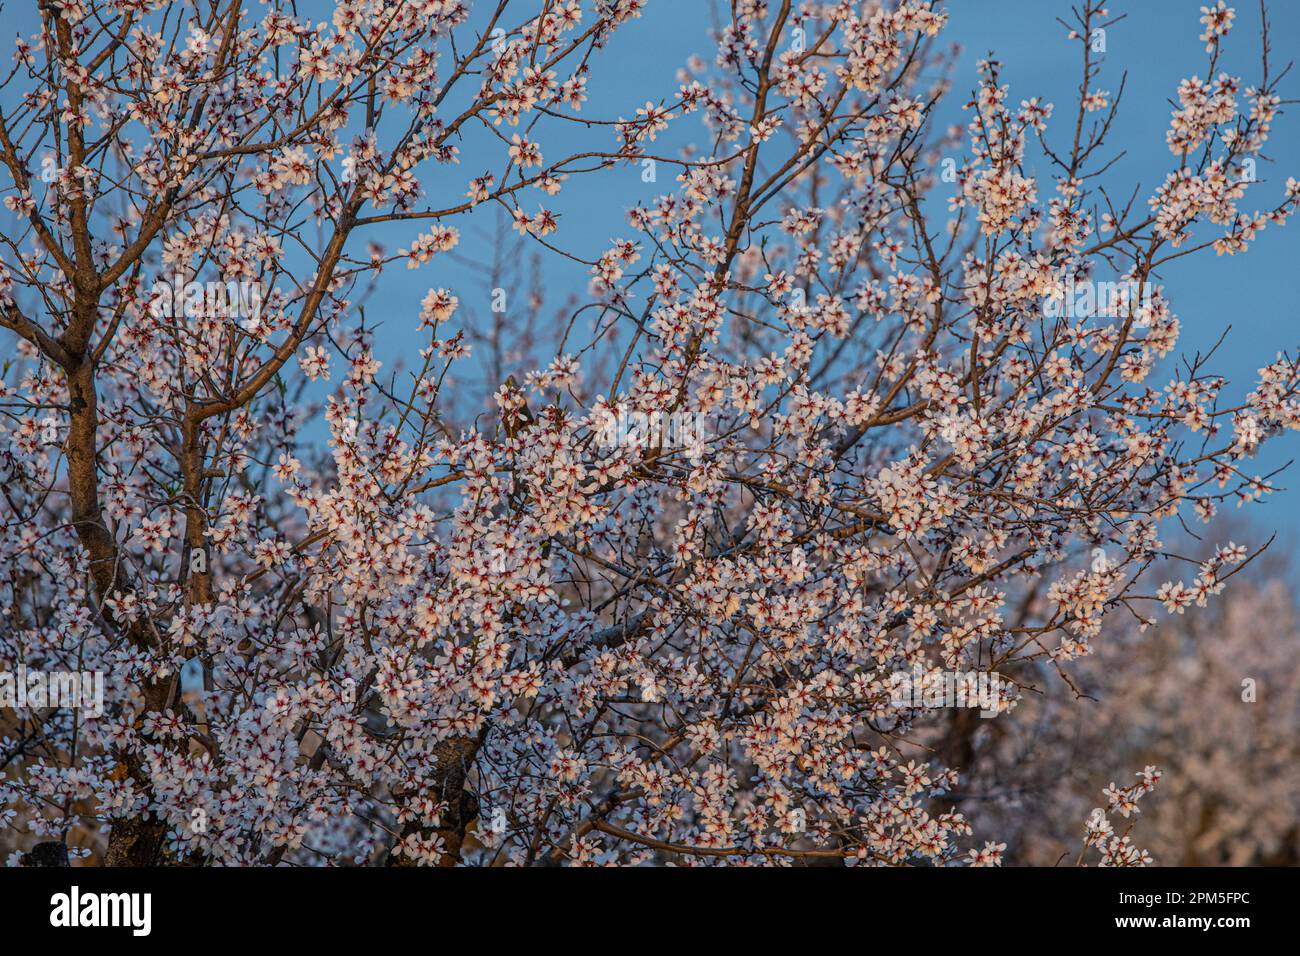 Cherry trees blossoming in Spain over blue sky Stock Photo